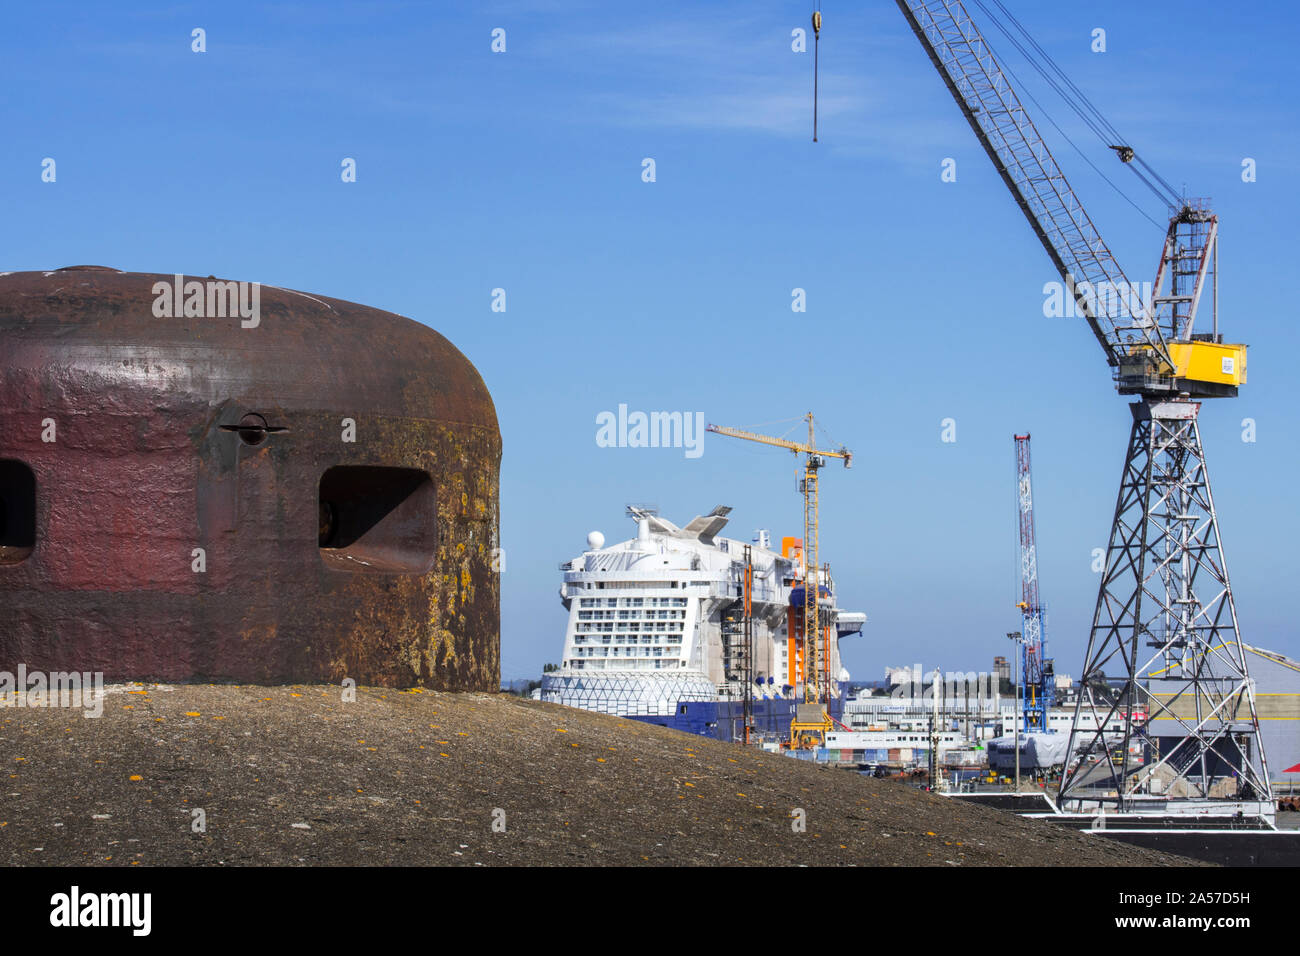 Steel turret from the German WW2 Kriegsmarine submarine base looking over the shipyard in the port of Saint-Nazaire, Loire-Atlantique, France Stock Photo